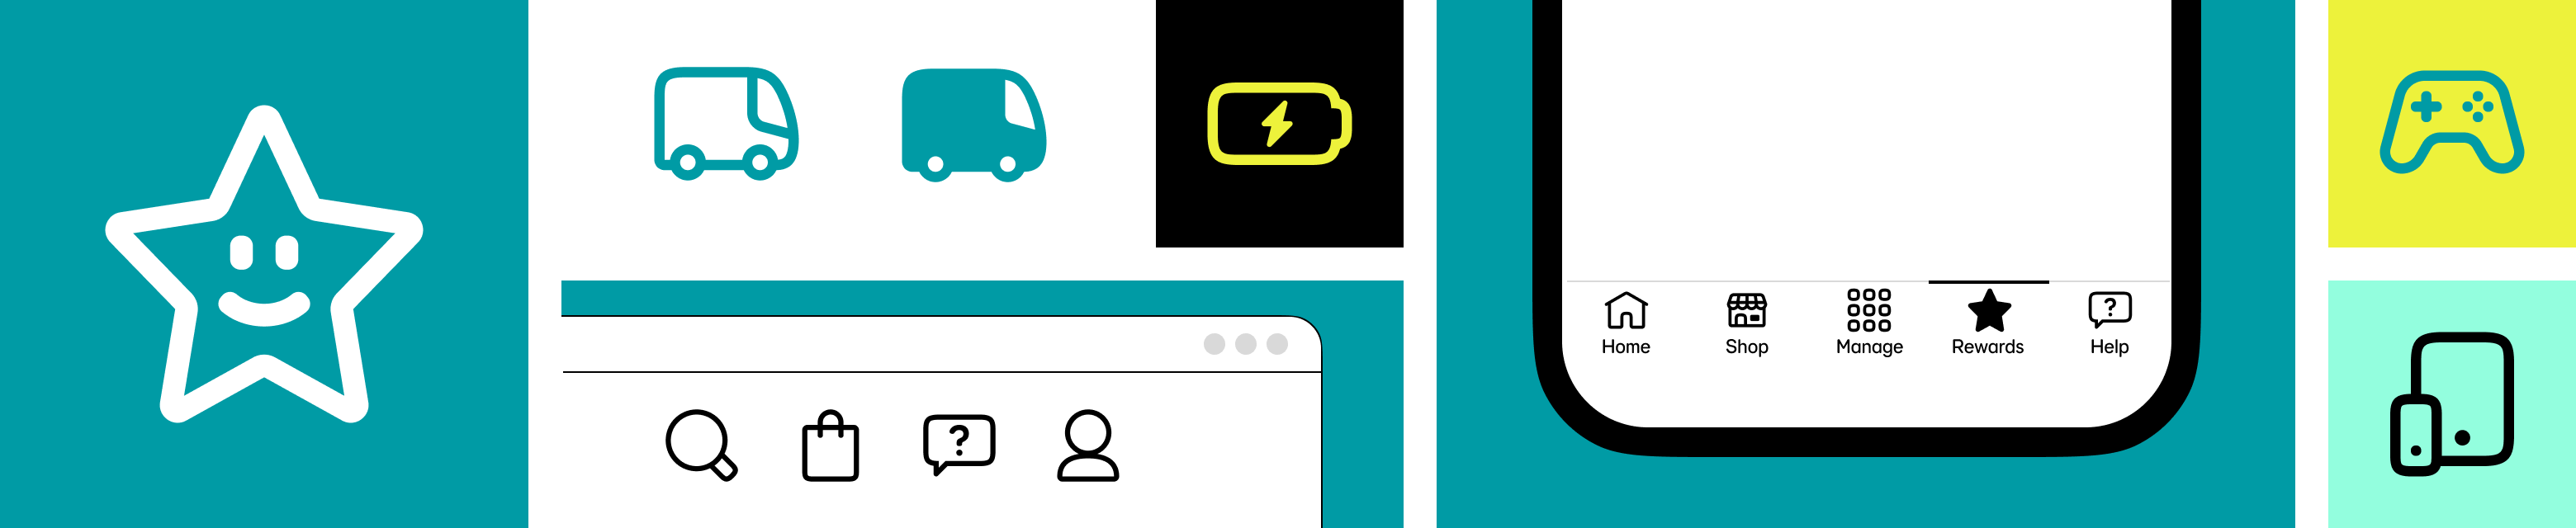 ee_icon_examples